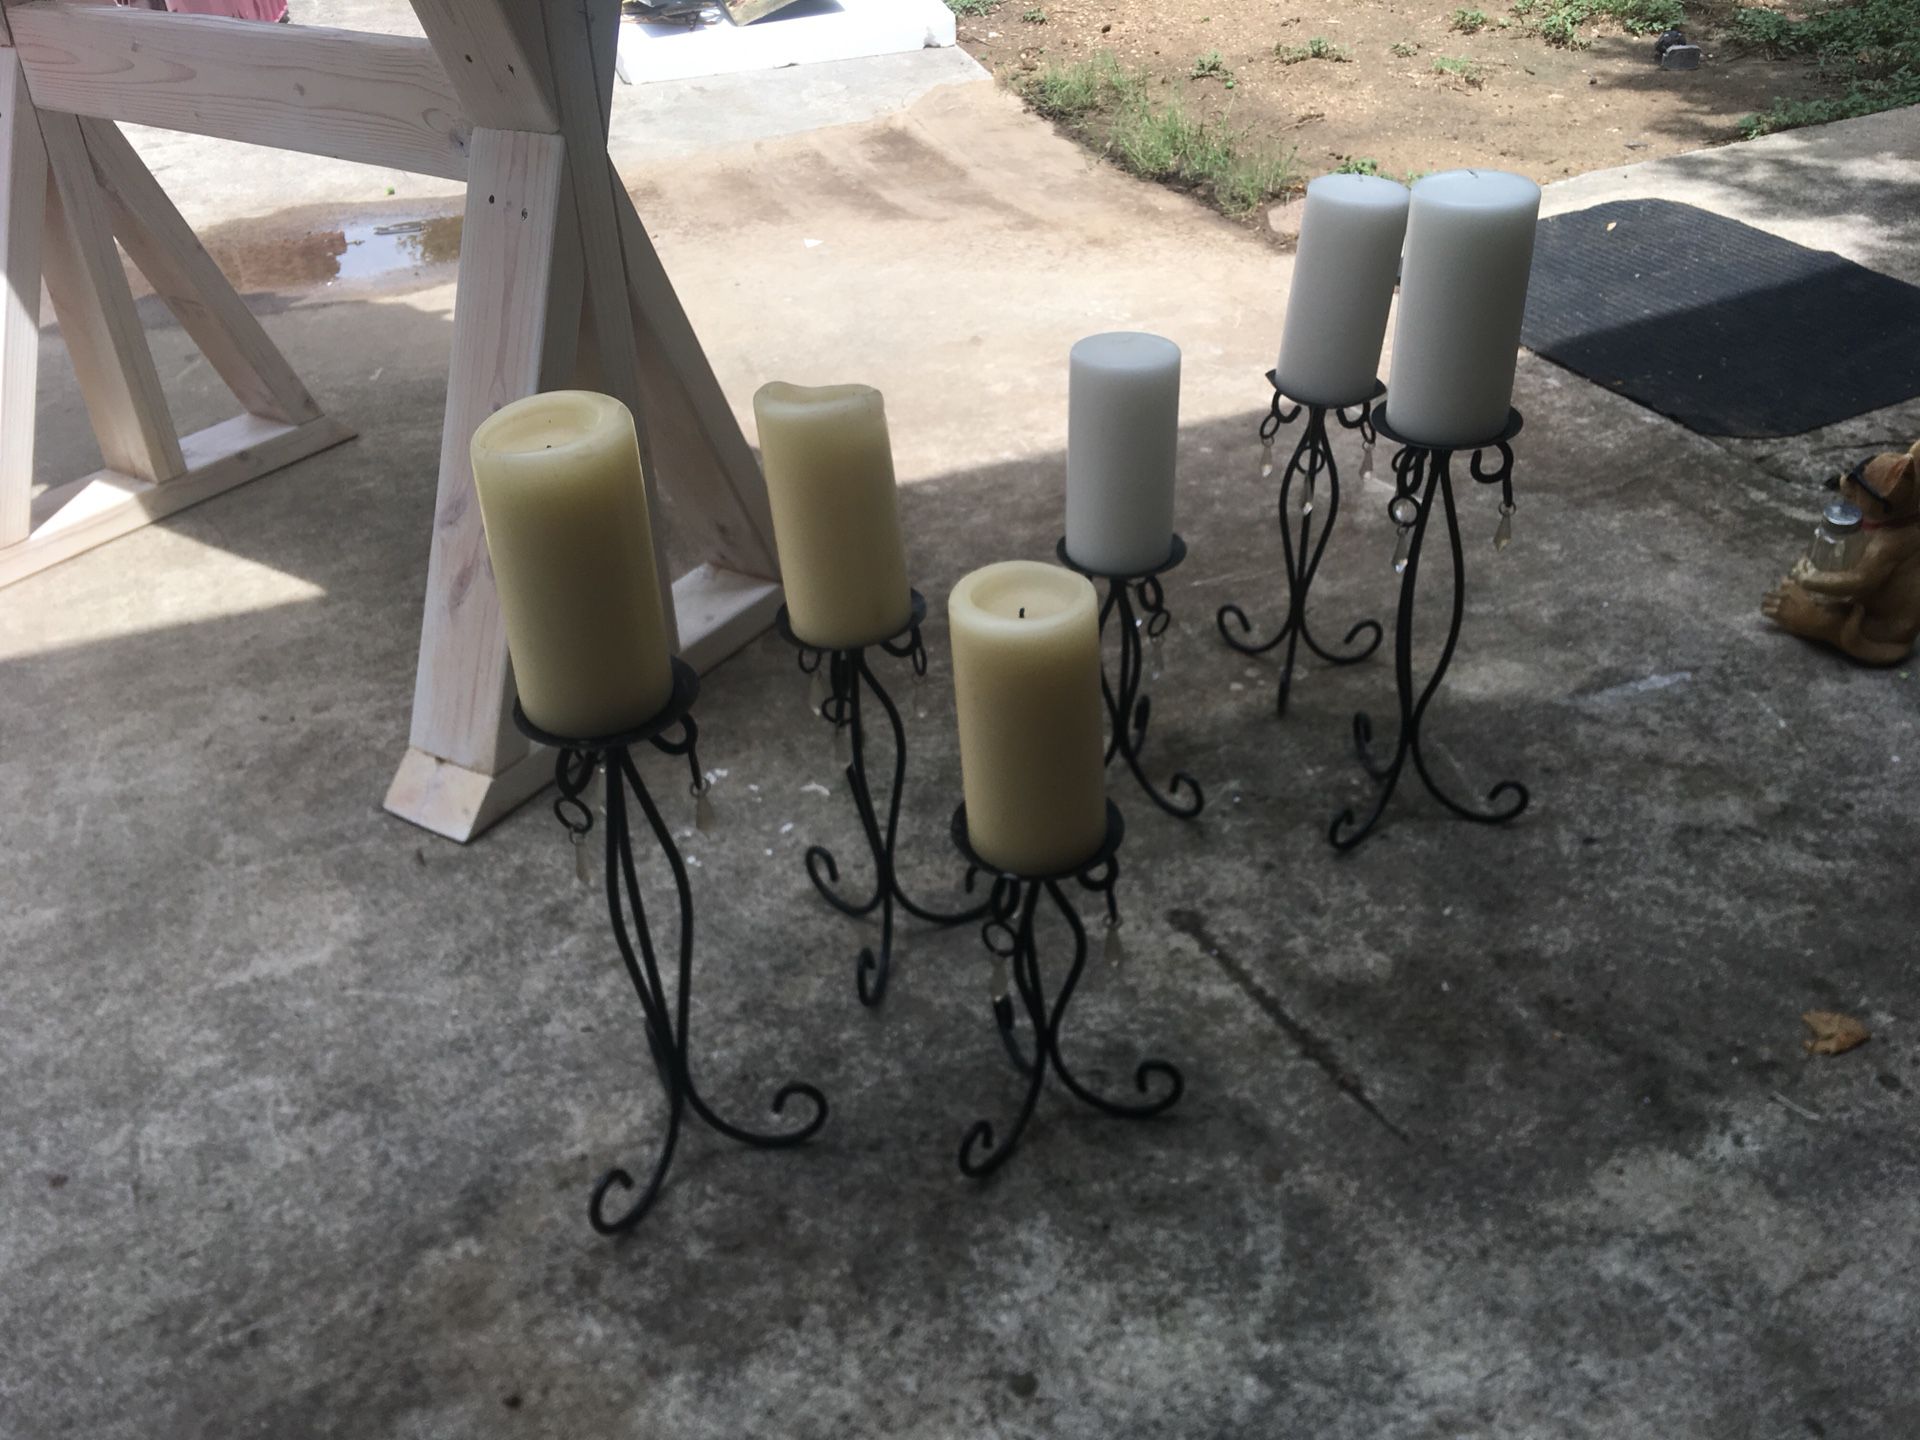 6 Candle Holders